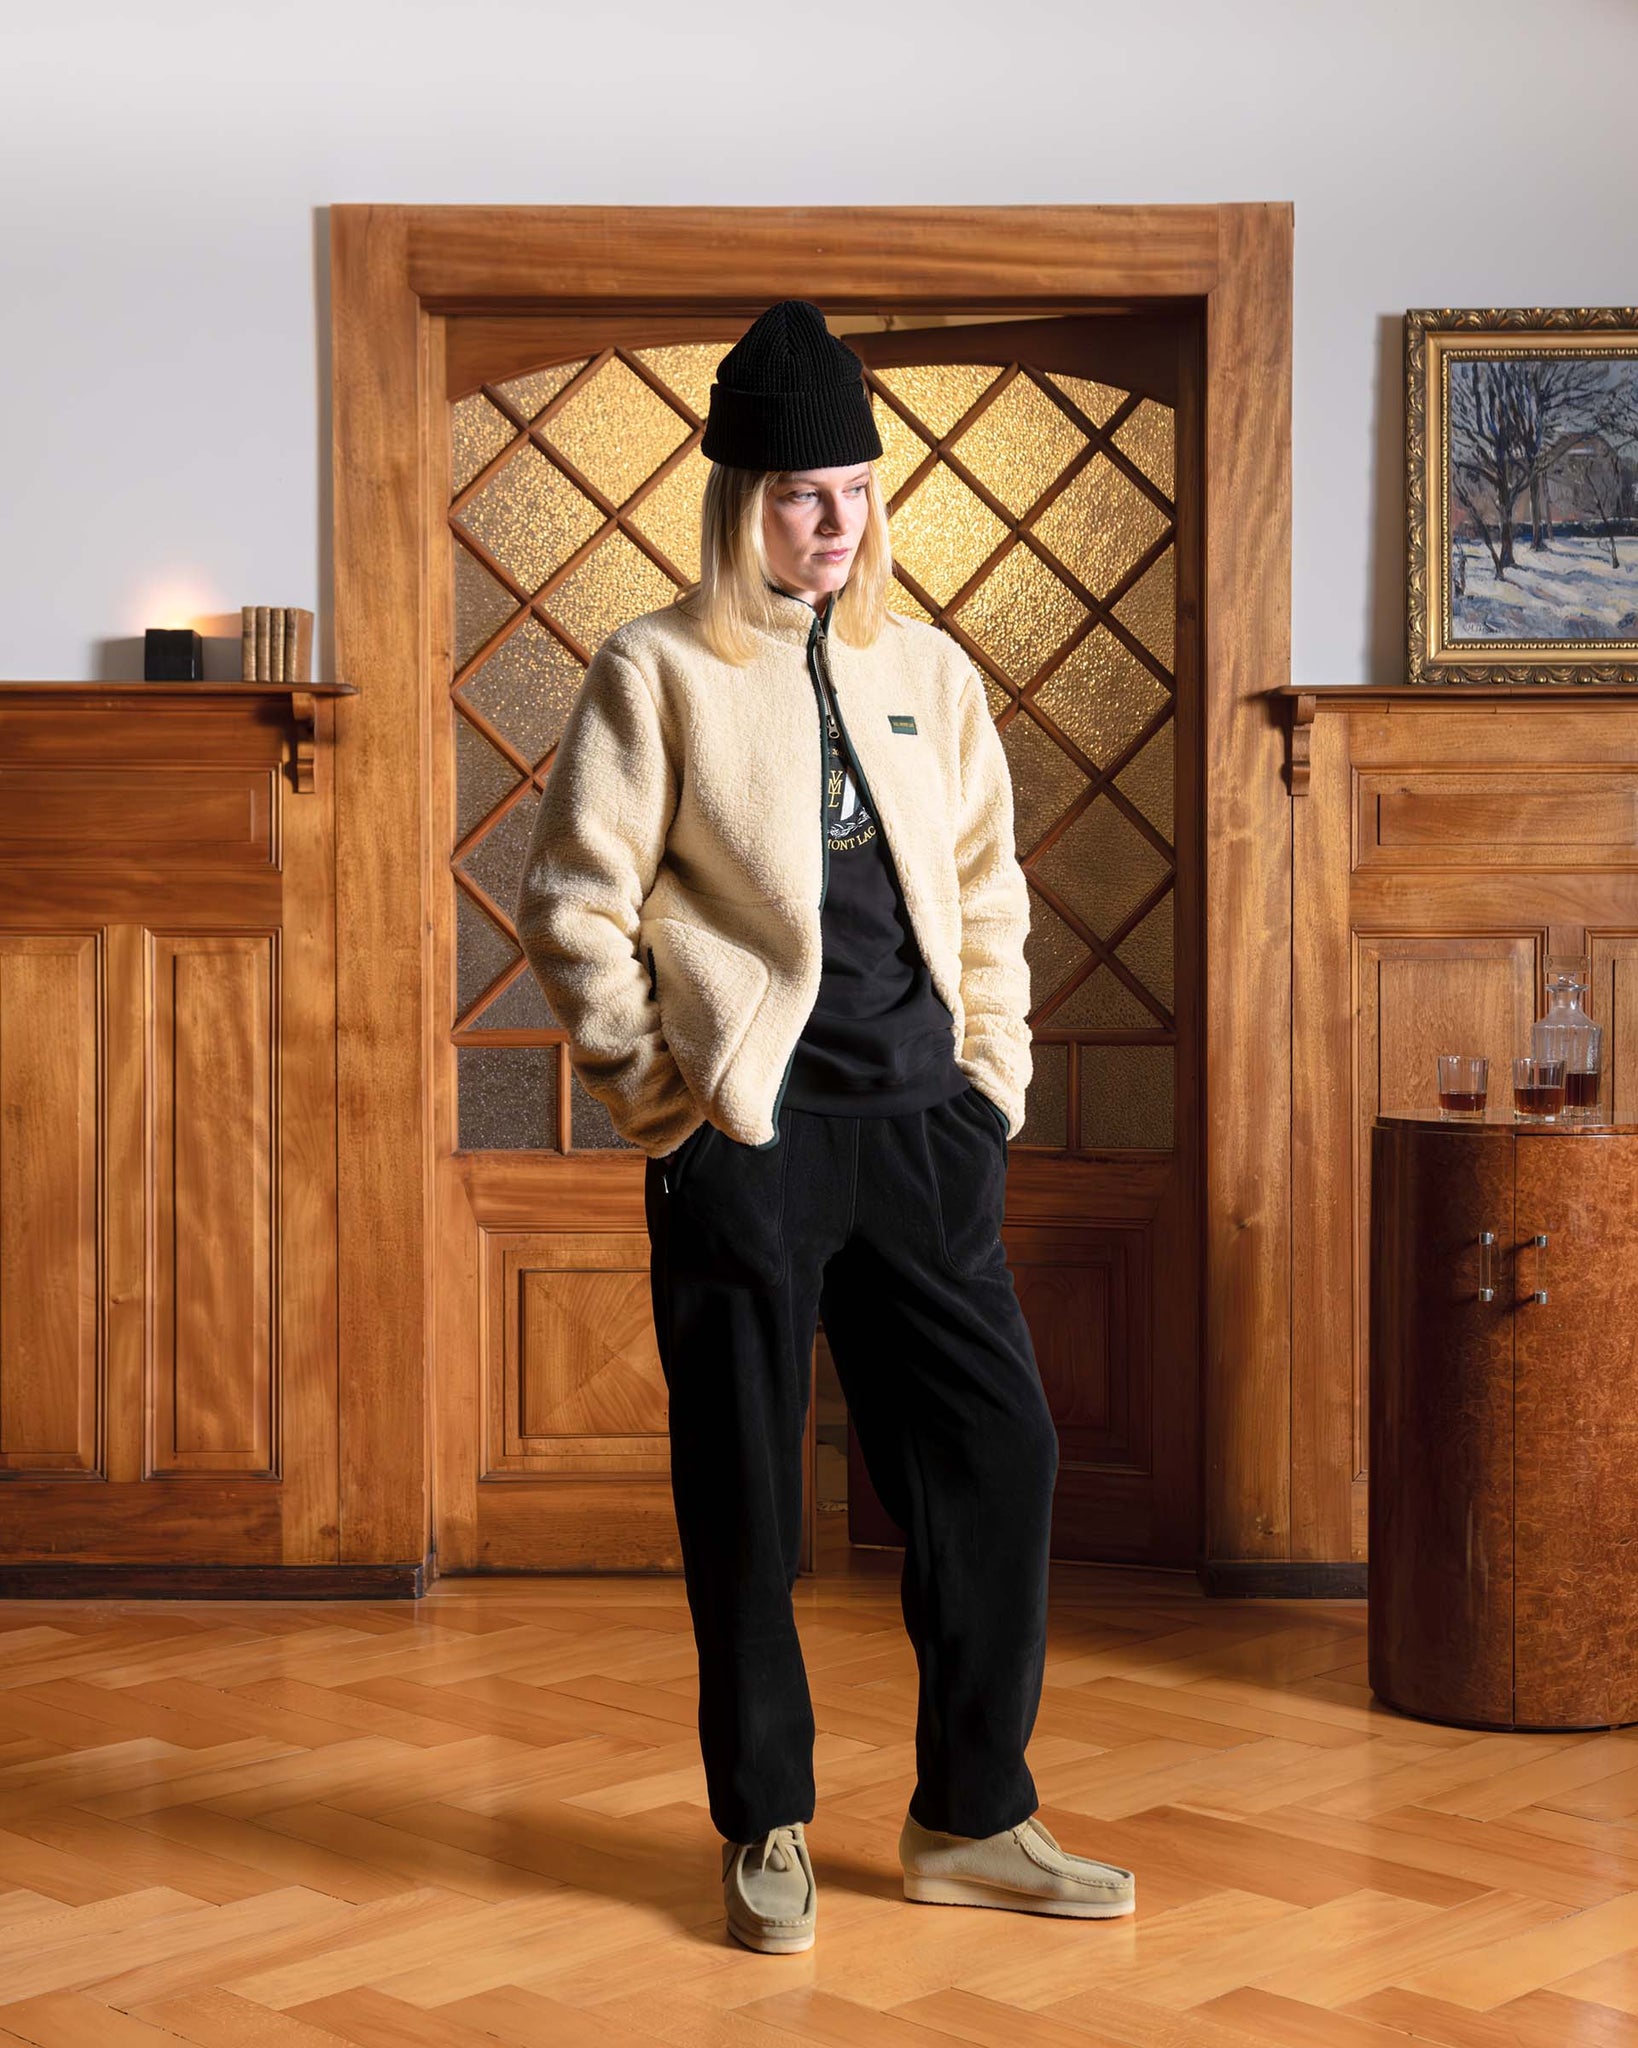 Woman wearing a Val Mont Lac fleece jacket and black outfit standing in a Swiss chalet